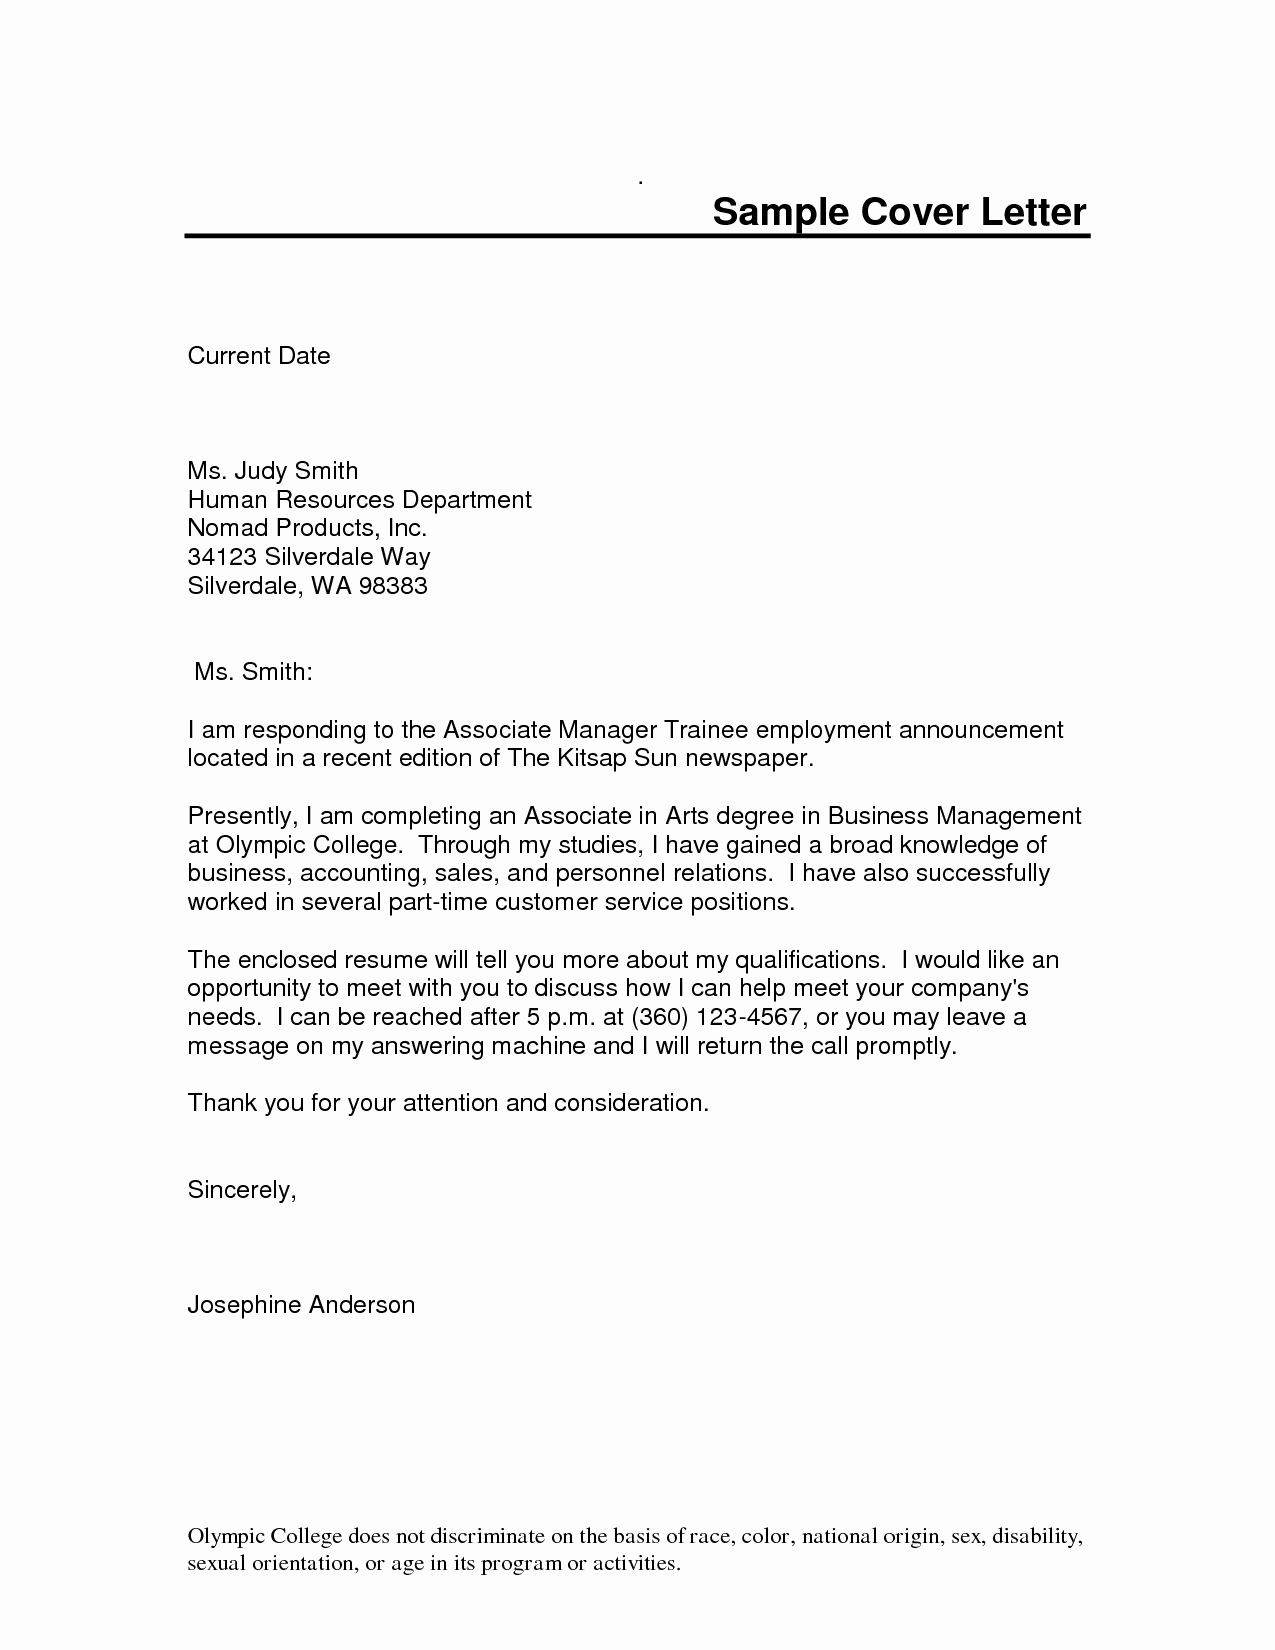 Business Letter format Microsoft Word Inspirational Cover Letter Template Microsoft Word